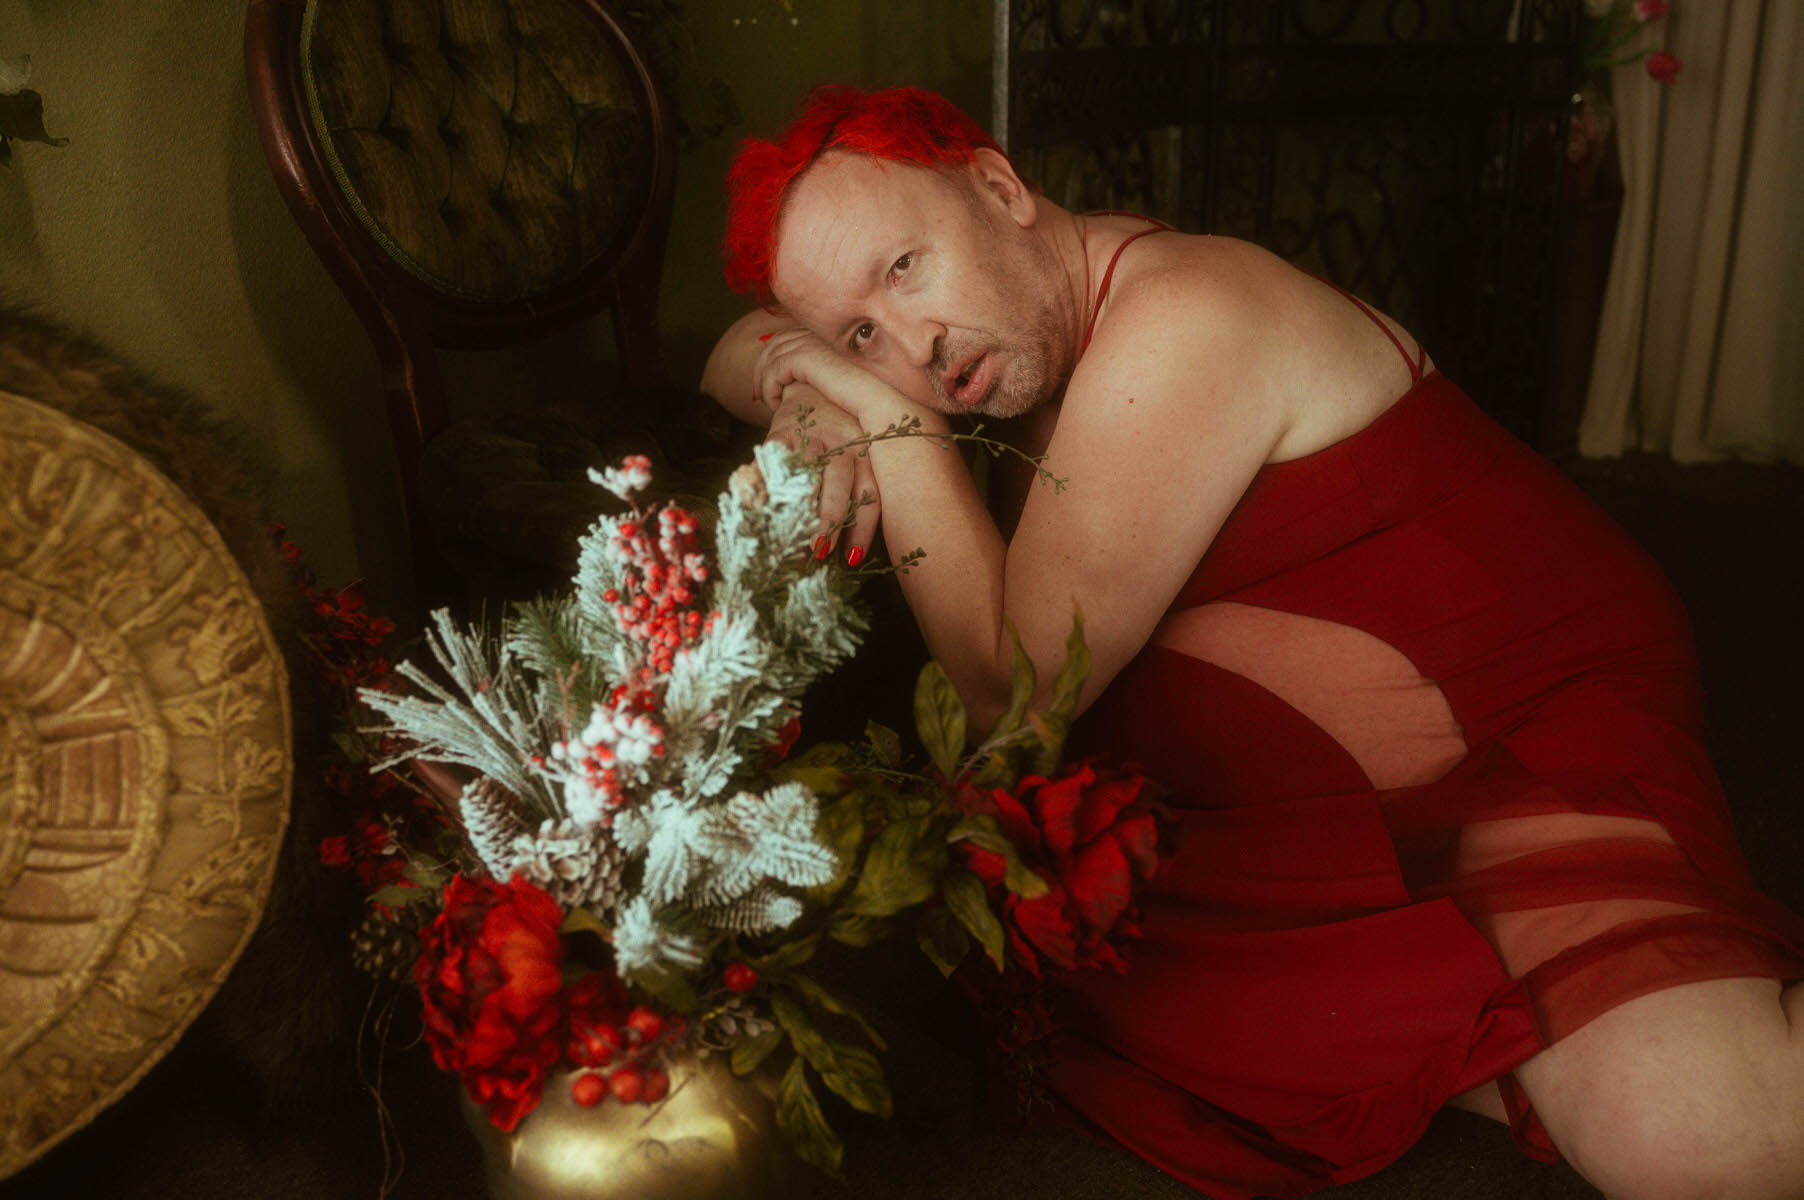 A trans woman in a red dress laying on the floor at a Dallas boudoir studio.